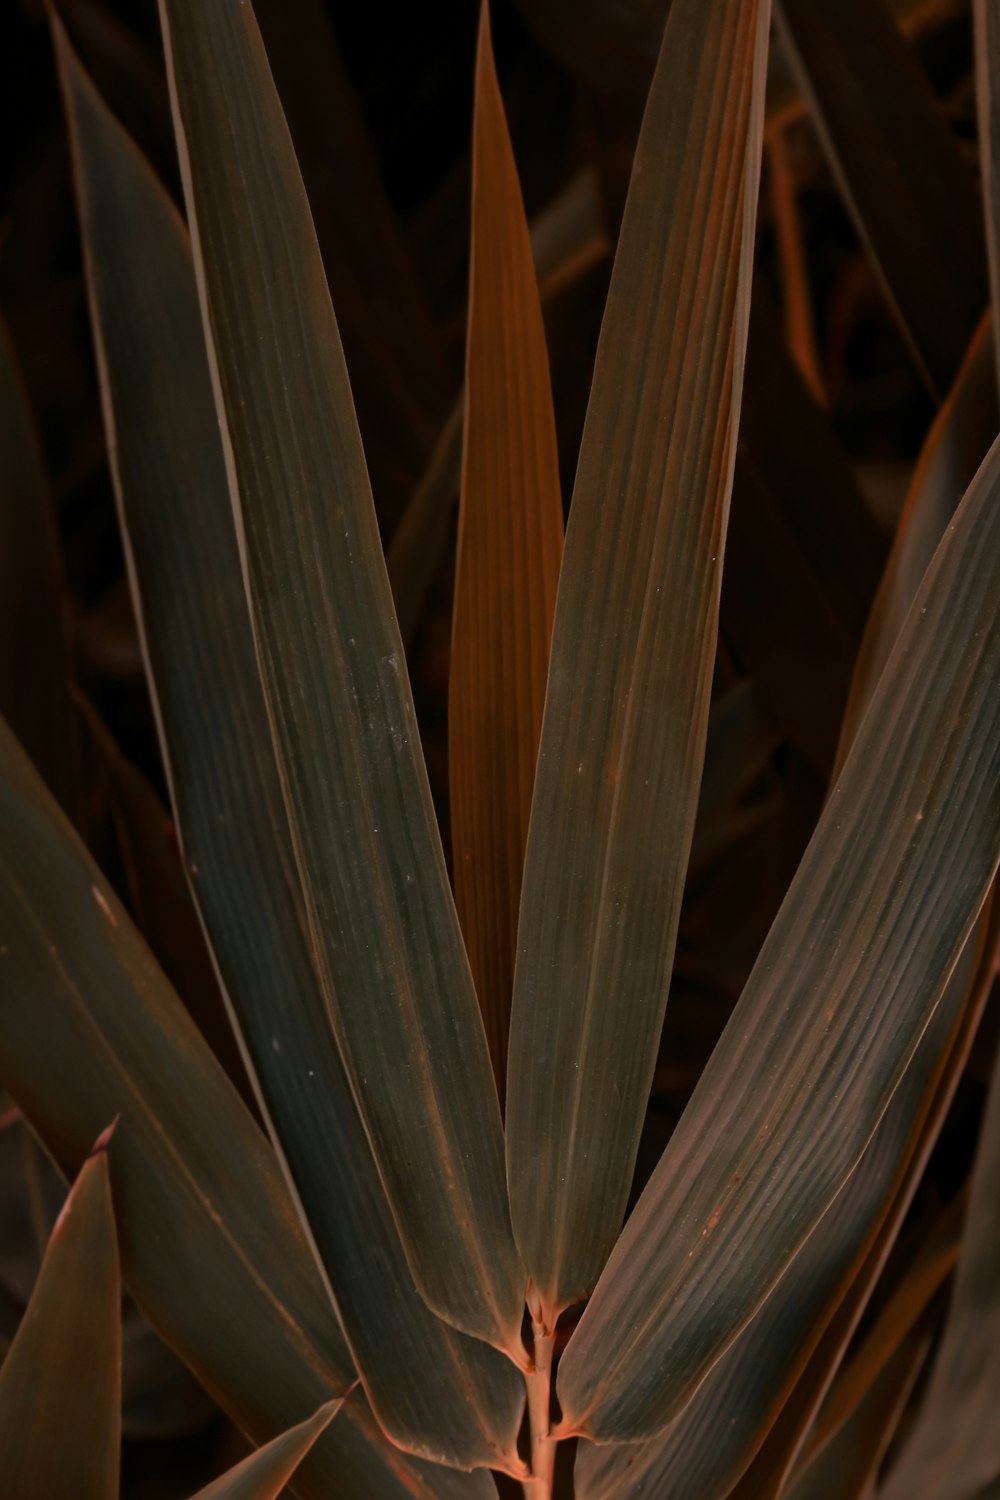 a close up of a plant with leaves